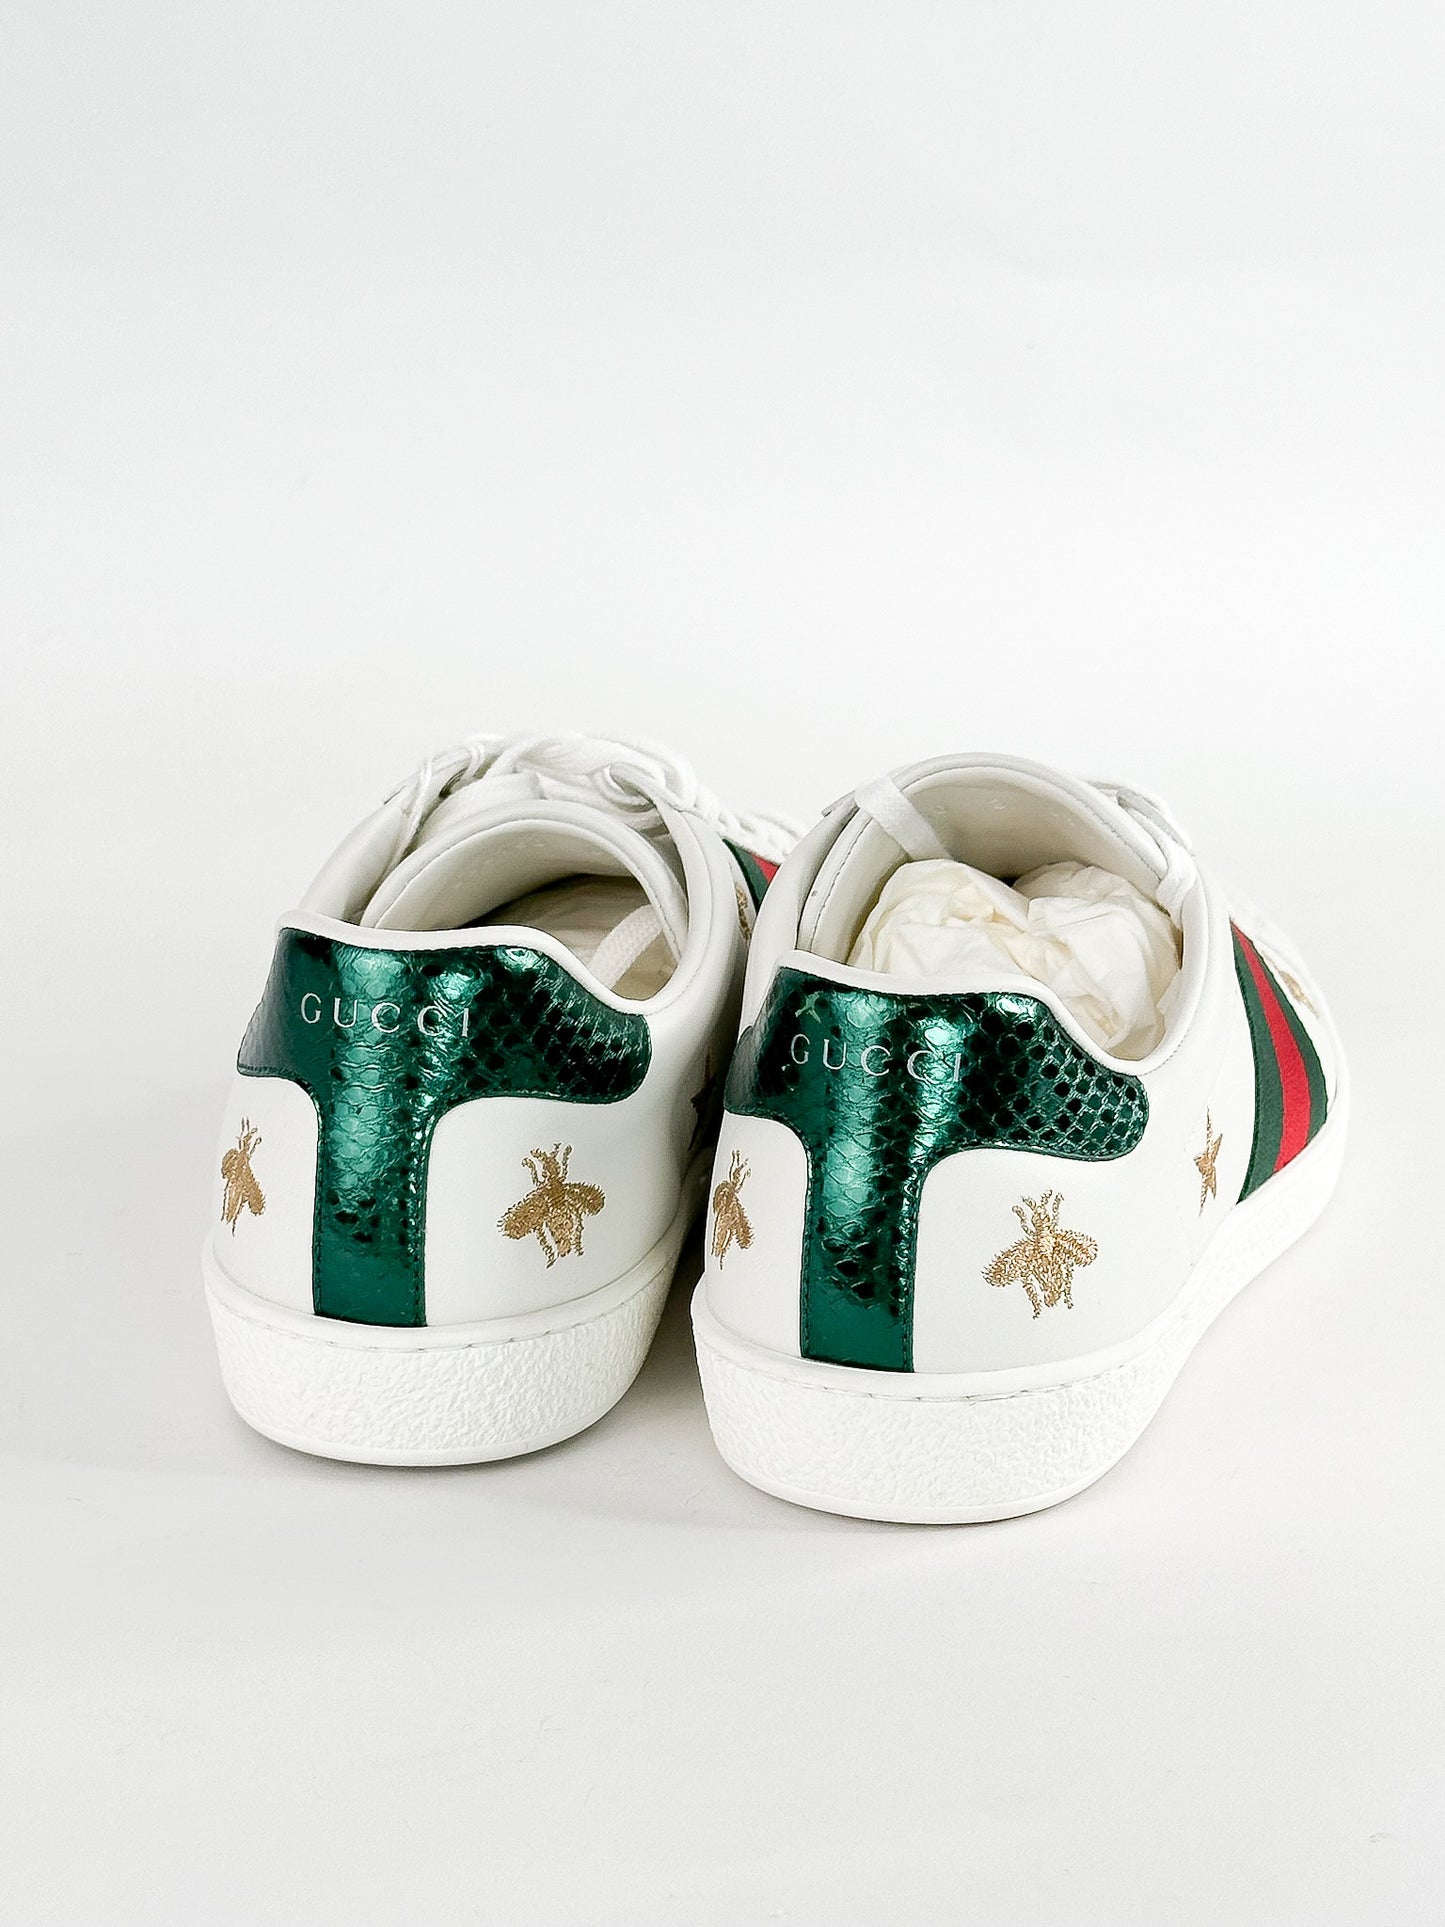 Gucci White Bee & Star New Ace Sneakers
Size Mens 8.5 / Womens 10.5-11